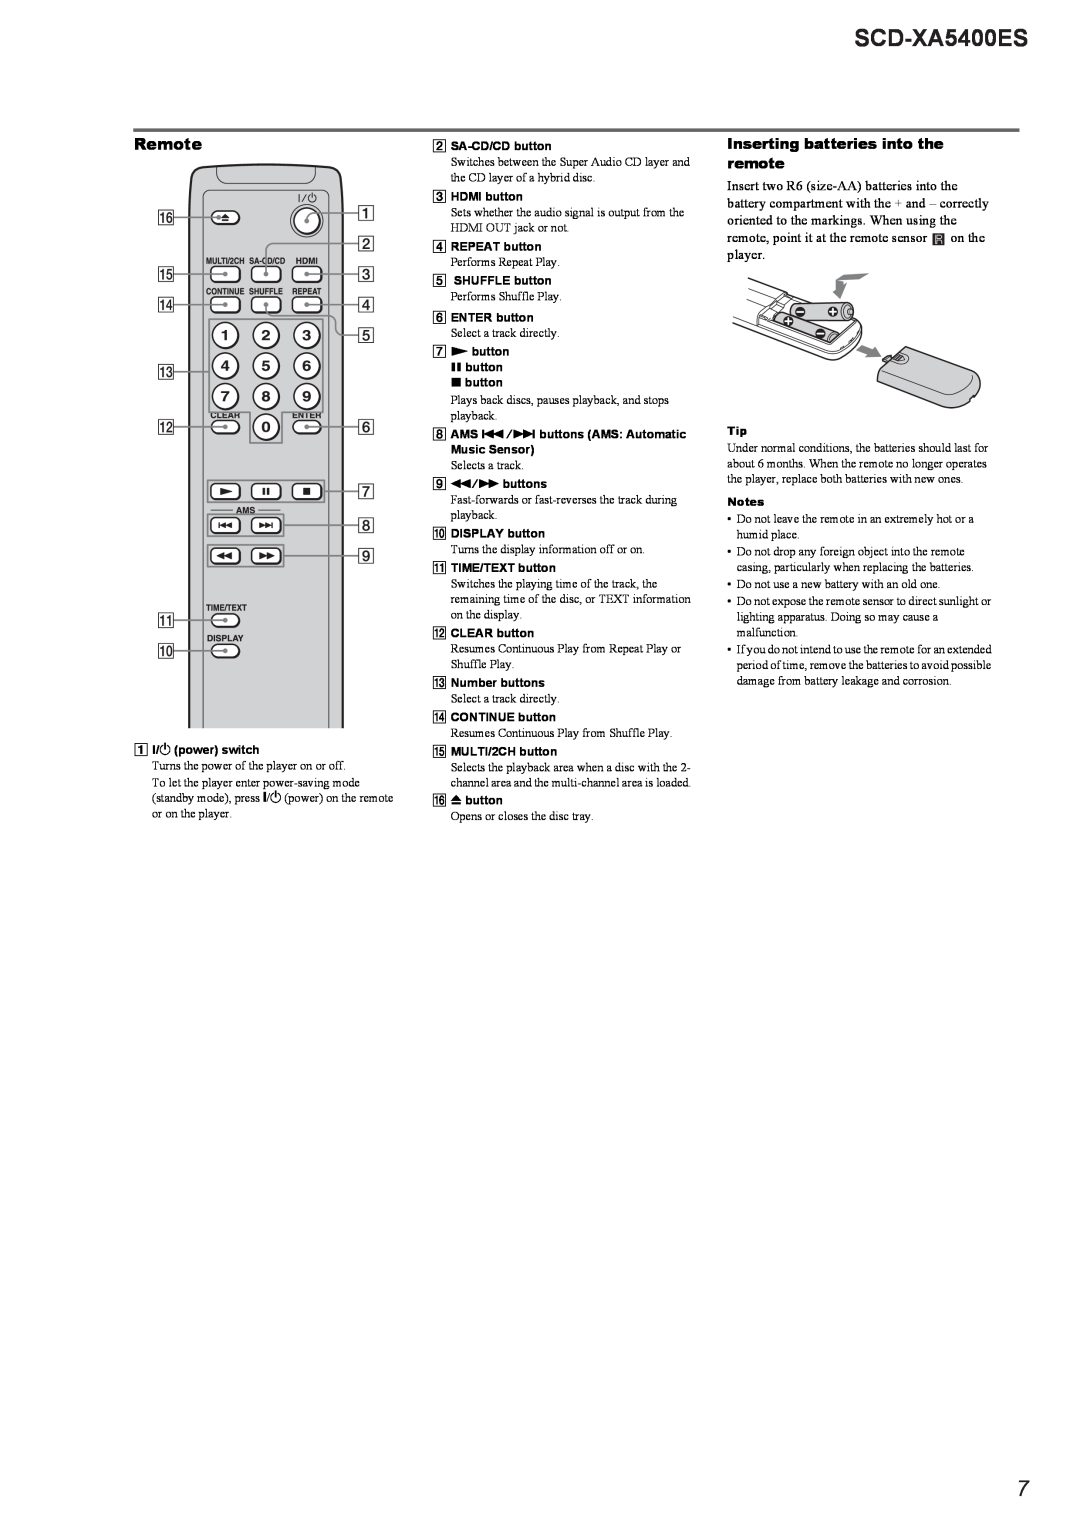 Sony 2008H05-1 service manual SCD-XA5400ES, Remote, Inserting batteries into the remote 